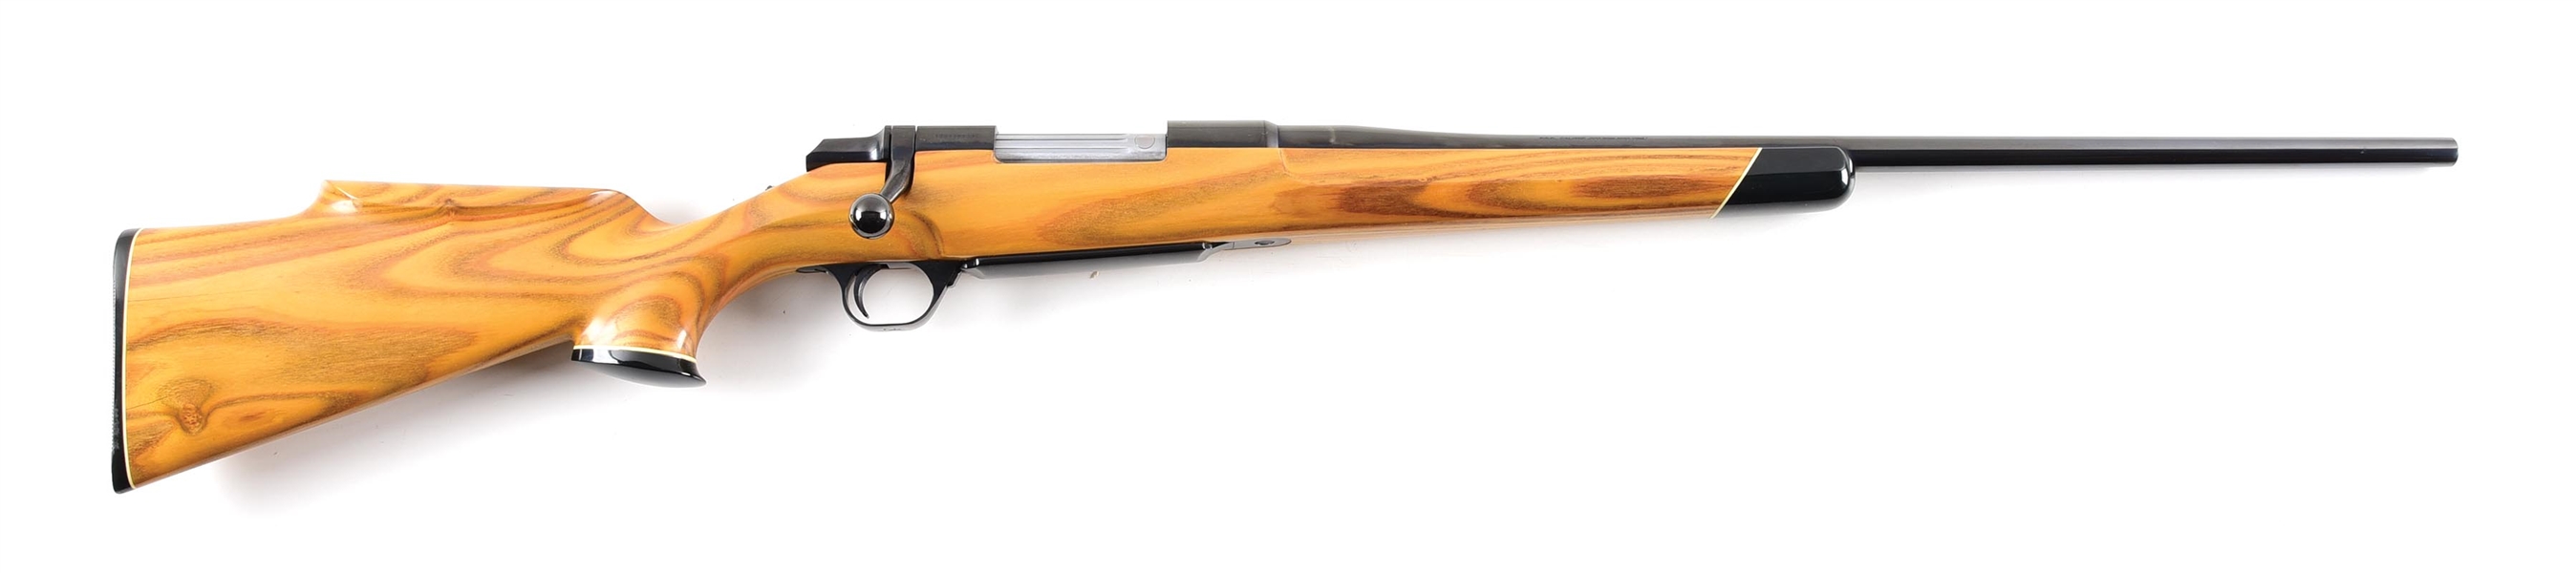 (M) BROWNING BBR BOLT ACTION RIFLE WITH SUMAC RHUS TYPHINA STOCK.